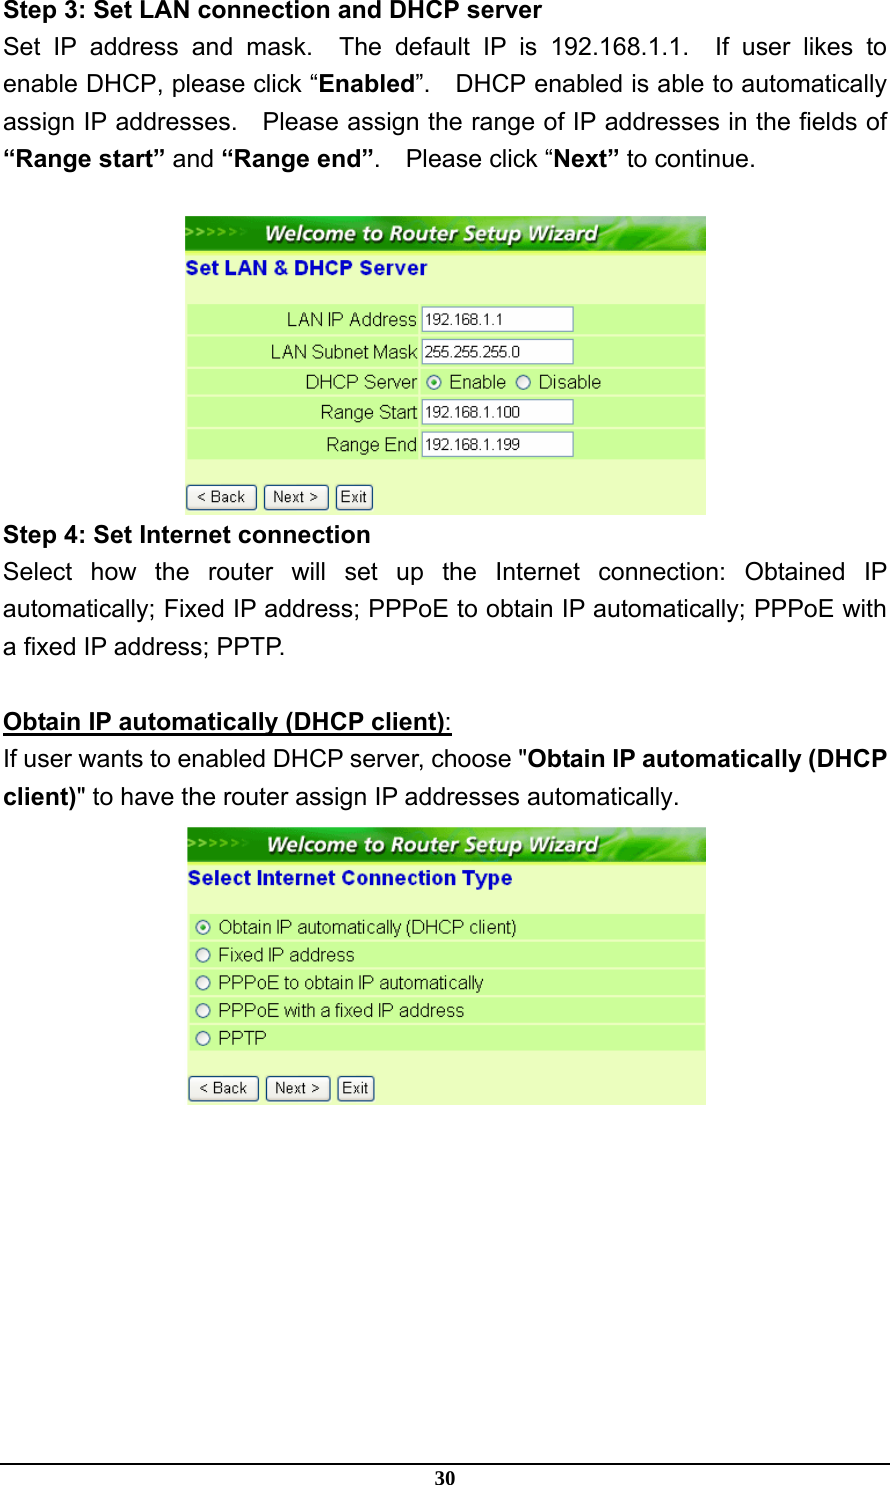 30 Step 3: Set LAN connection and DHCP server Set IP address and mask.  The default IP is 192.168.1.1.  If user likes to enable DHCP, please click “Enabled”.    DHCP enabled is able to automatically assign IP addresses.    Please assign the range of IP addresses in the fields of “Range start” and “Range end”.  Please click “Next” to continue.   Step 4: Set Internet connection Select how the router will set up the Internet connection: Obtained IP automatically; Fixed IP address; PPPoE to obtain IP automatically; PPPoE with a fixed IP address; PPTP.  Obtain IP automatically (DHCP client): If user wants to enabled DHCP server, choose &quot;Obtain IP automatically (DHCP client)&quot; to have the router assign IP addresses automatically.  